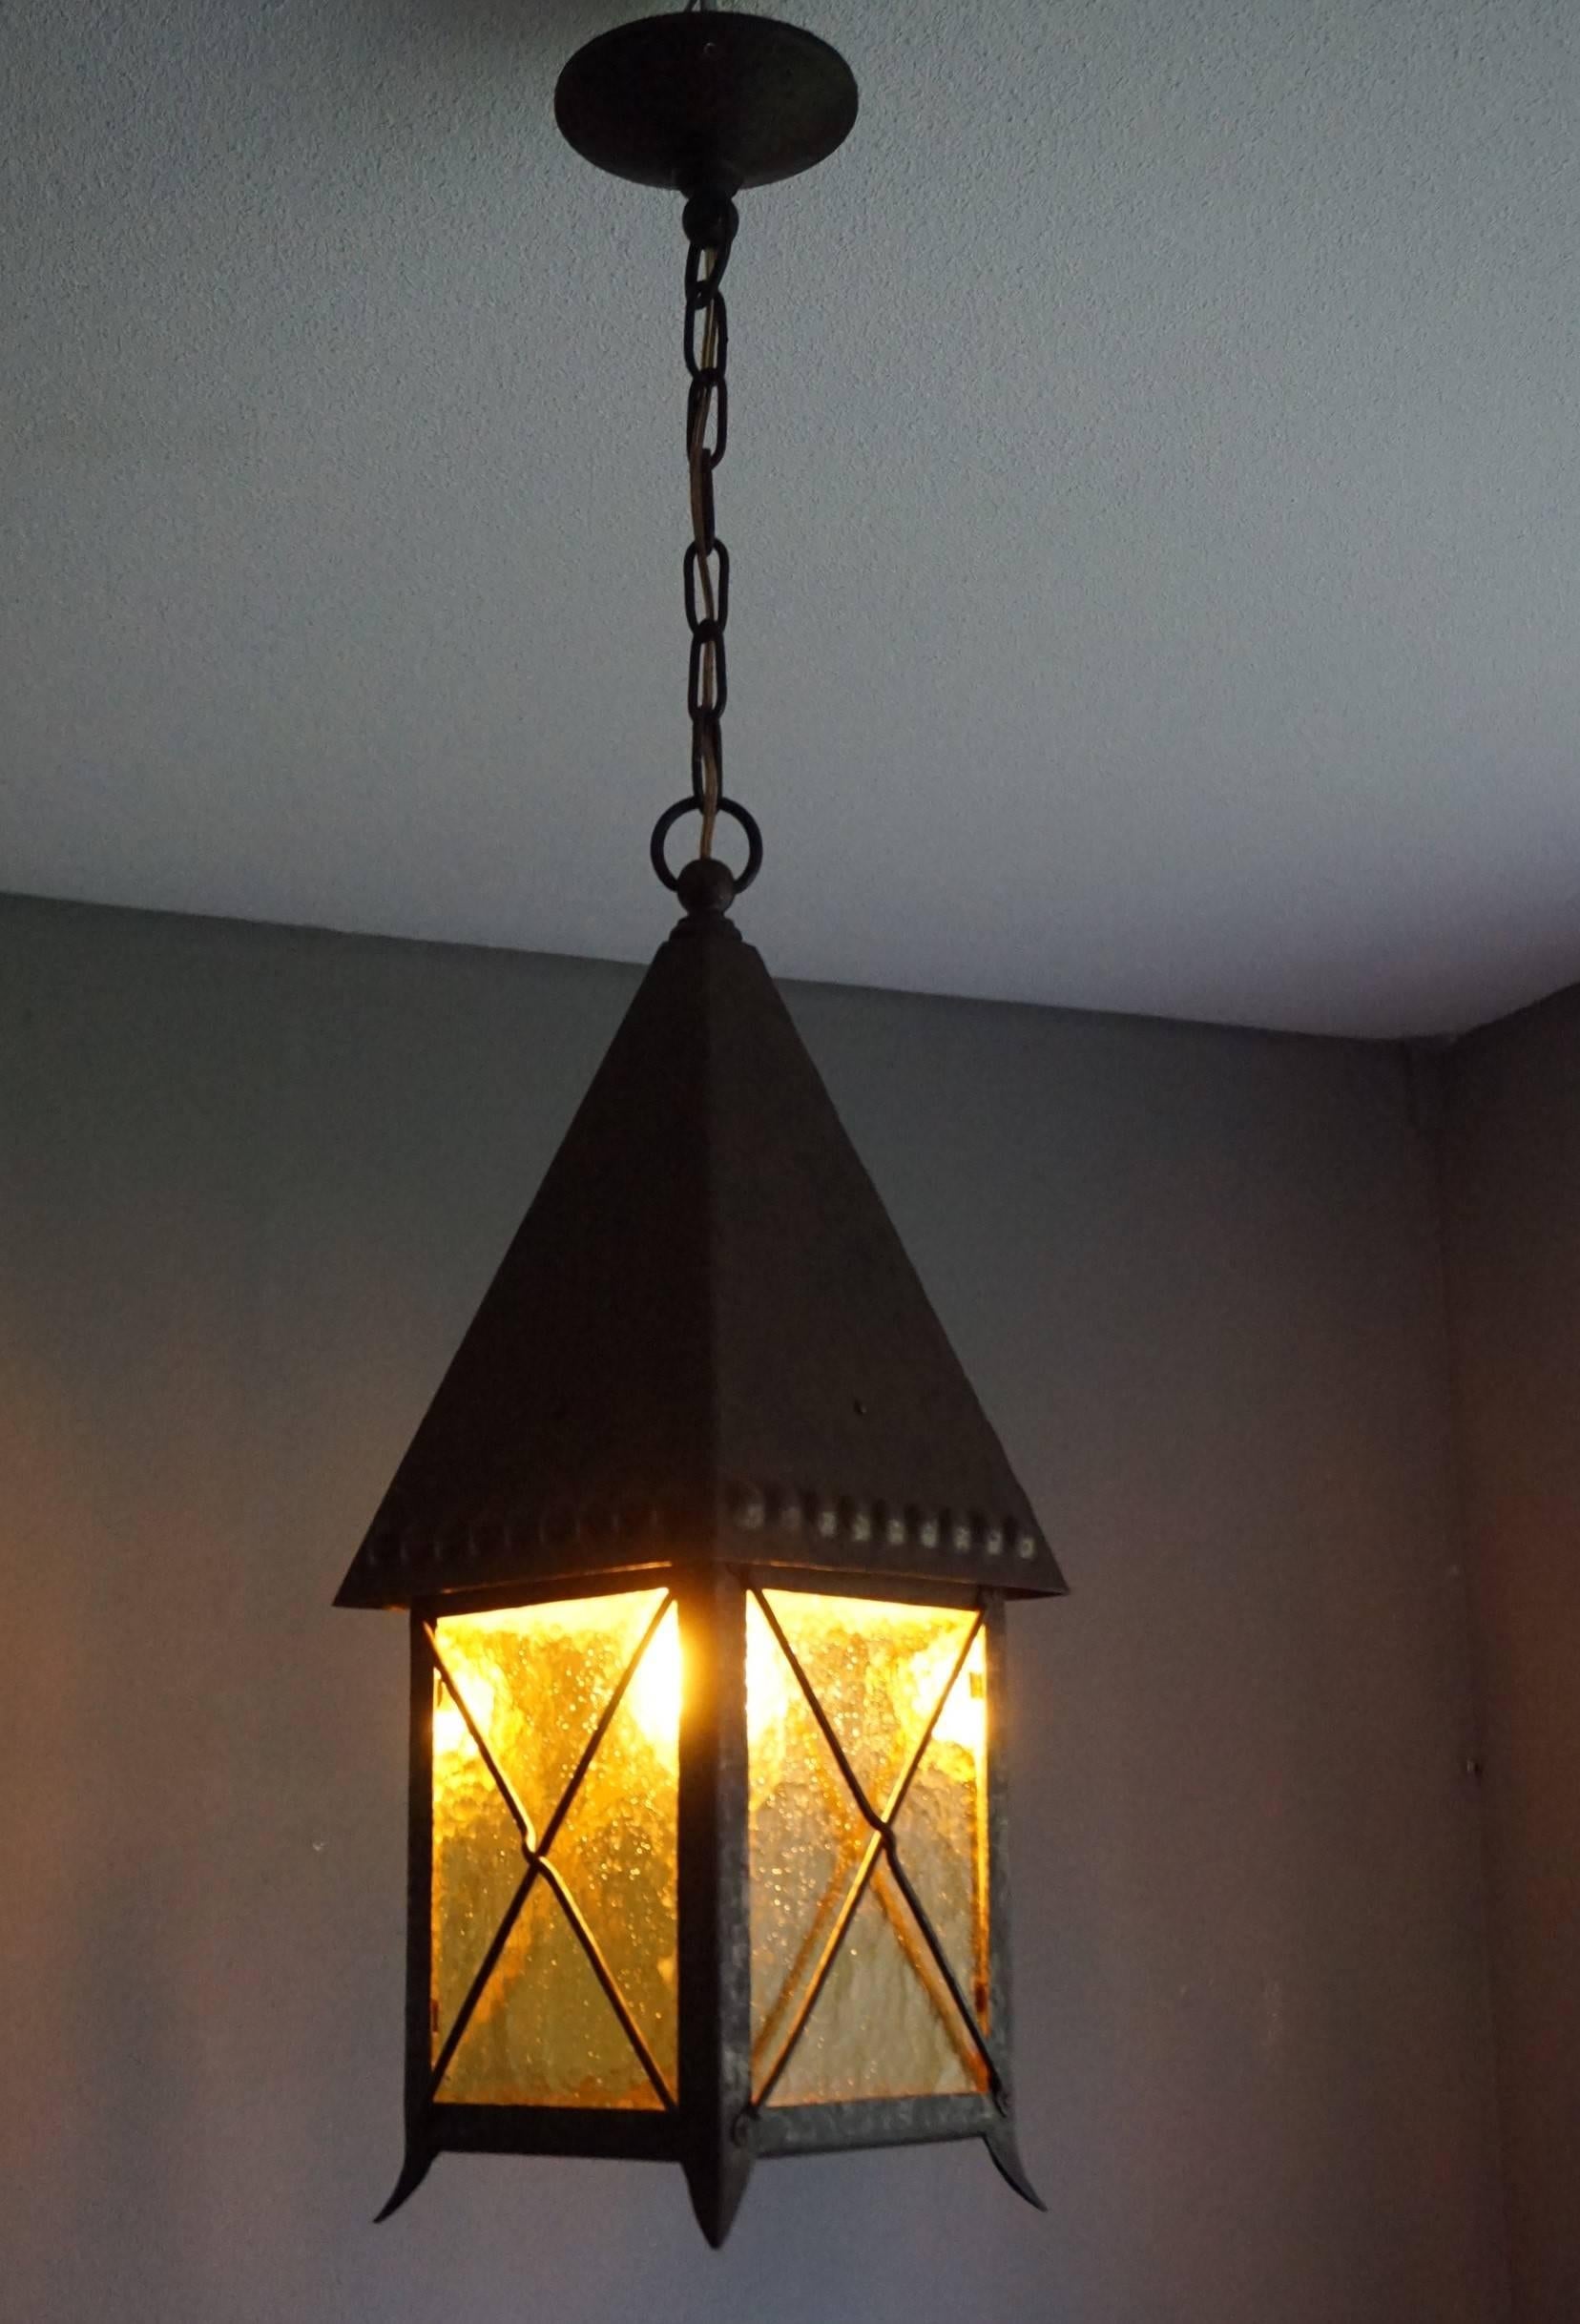 One of a kind, hand-crafted pendant with original amber color glass.

If you live in an early 20th century house or appartment then this practical size and all hand-crafted, wrought iron pendant could be perfect for you. This fine example was made